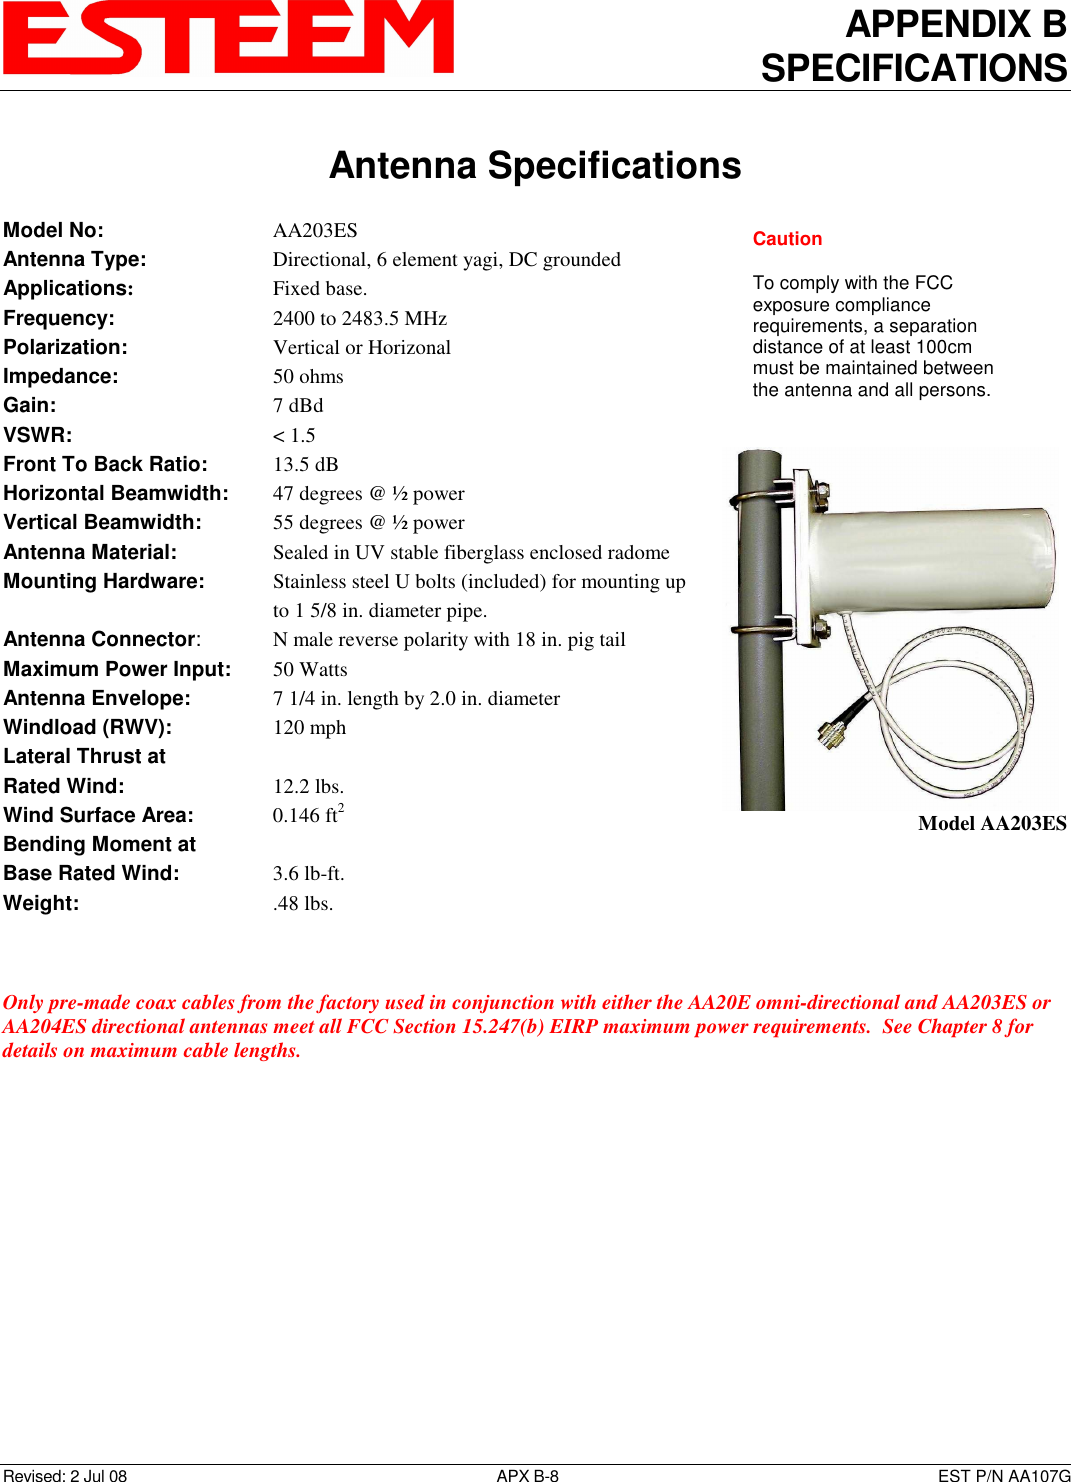 APPENDIX B SPECIFICATIONS   Antenna Specifications  Revised: 2 Jul 08  APX B-8  EST P/N AA107G Model No:        AA203ES Antenna Type:      Directional, 6 element yagi, DC grounded  Applications:       Fixed base. Frequency:        2400 to 2483.5 MHz  Polarization:        Vertical or Horizonal Impedance:        50 ohms Gain:          7 dBd VSWR:          &lt; 1.5  Front To Back Ratio:    13.5 dB Horizontal Beamwidth:  47 degrees @ ½ power Vertical Beamwidth:      55 degrees @ ½ power Antenna Material:     Sealed in UV stable fiberglass enclosed radome  Mounting Hardware:      Stainless steel U bolts (included) for mounting up to 1 5/8 in. diameter pipe. Antenna Connector:    N male reverse polarity with 18 in. pig tail Maximum Power Input:  50 Watts Antenna Envelope:    7 1/4 in. length by 2.0 in. diameter Windload (RWV):      120 mph Lateral Thrust at  Rated Wind:        12.2 lbs. Wind Surface Area:    0.146 ft2 Bending Moment at Base Rated Wind:     3.6 lb-ft. Weight:          .48 lbs.    Only pre-made coax cables from the factory used in conjunction with either the AA20E omni-directional and AA203ES or AA204ES directional antennas meet all FCC Section 15.247(b) EIRP maximum power requirements.  See Chapter 8 for details on maximum cable lengths.  Model AA203ES Caution  To comply with the FCC exposure compliance requirements, a separation distance of at least 100cm must be maintained between the antenna and all persons. 